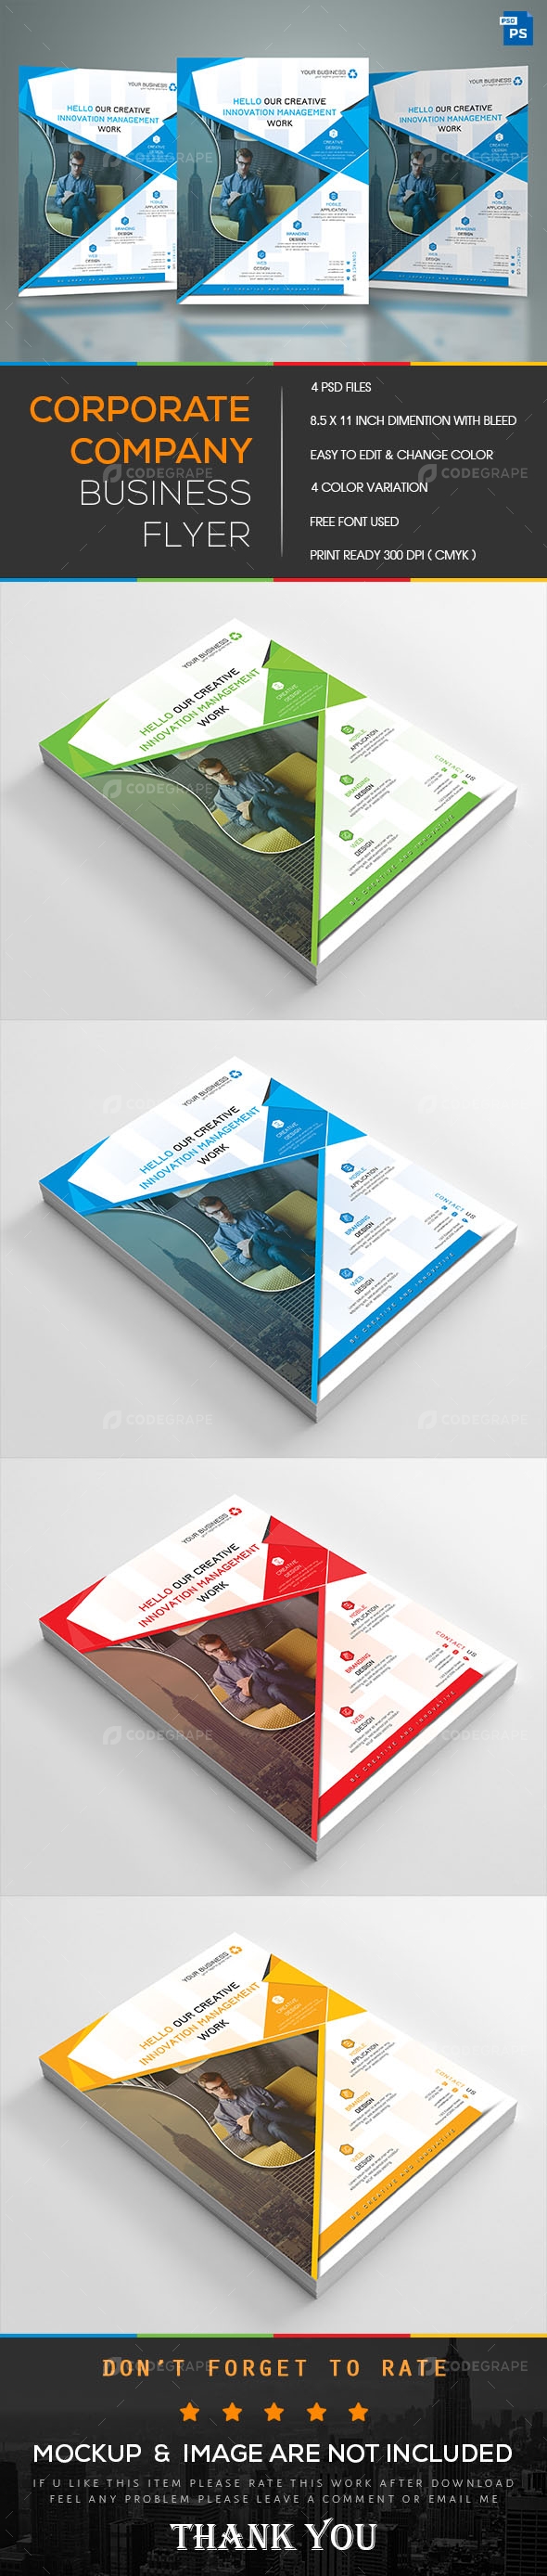 Corporate Company Business Flyer